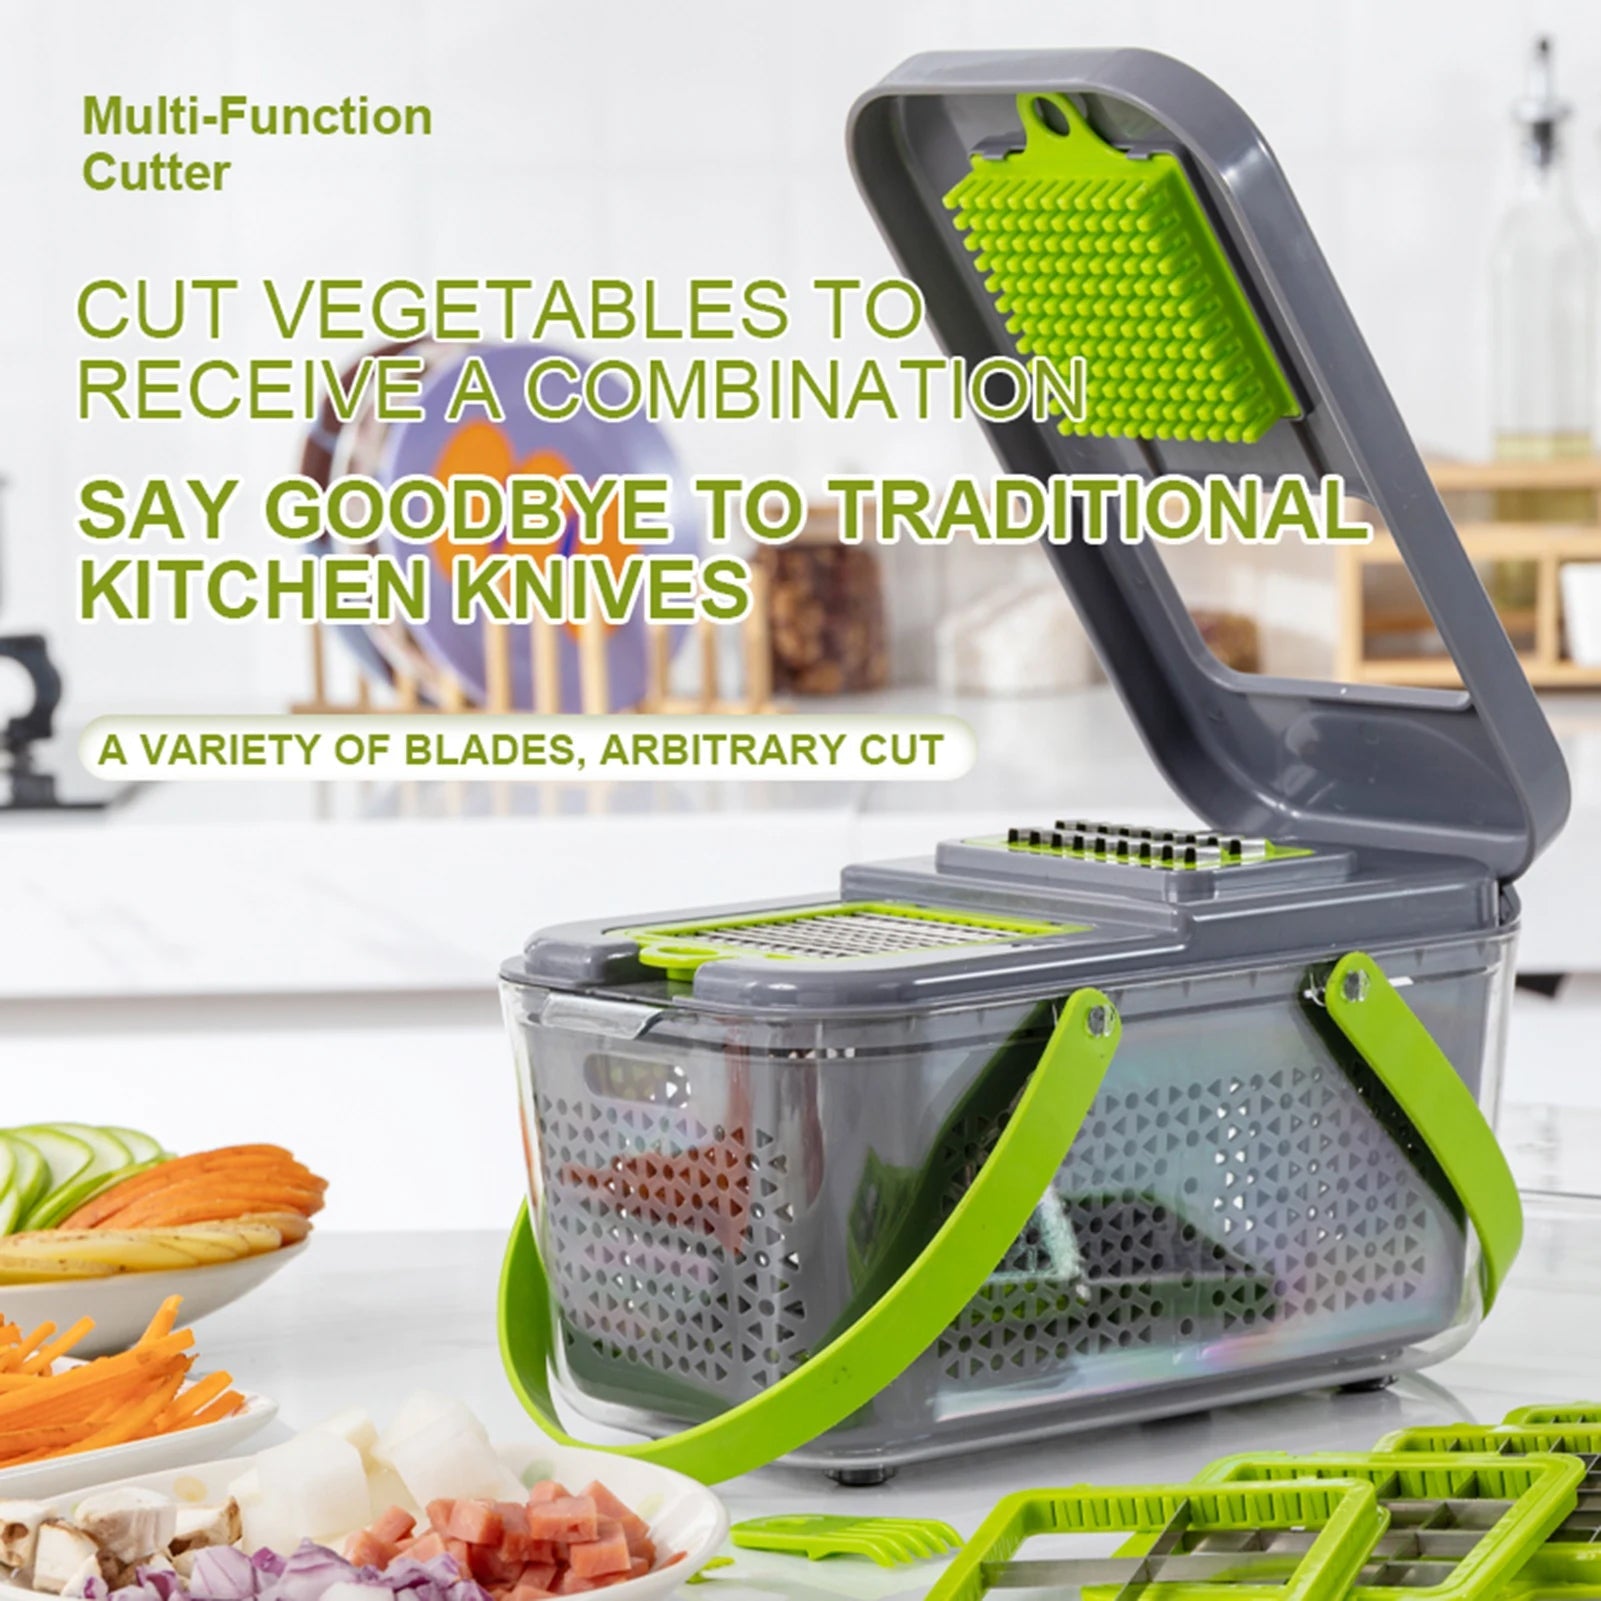 22-in-1 Vegetable Cutter - Save Your Time and Effort